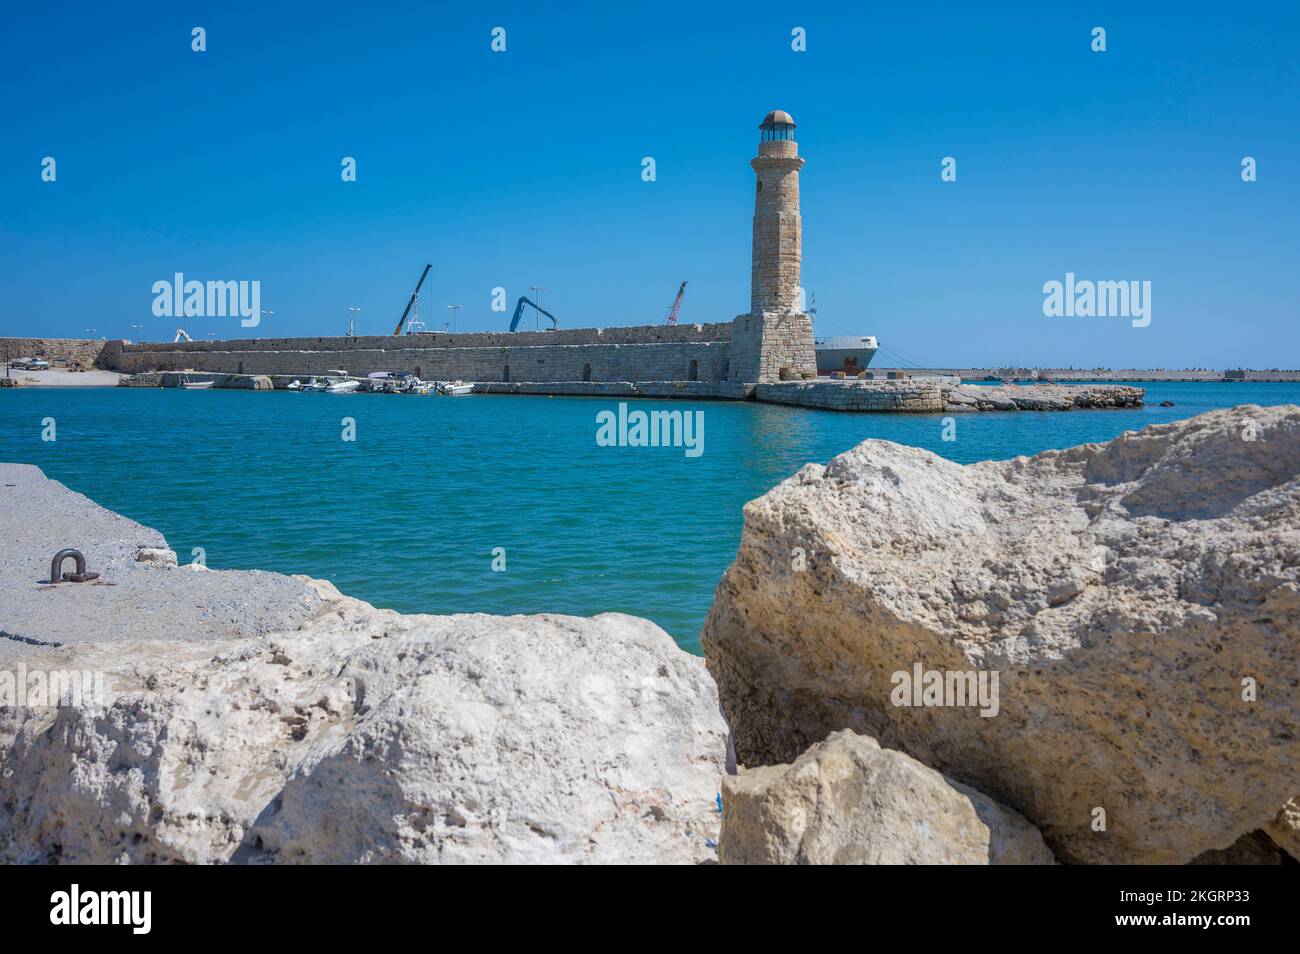 Greece, Crete, Rethymno, Lighthouse with coastal boulders in foreground Stock Photo